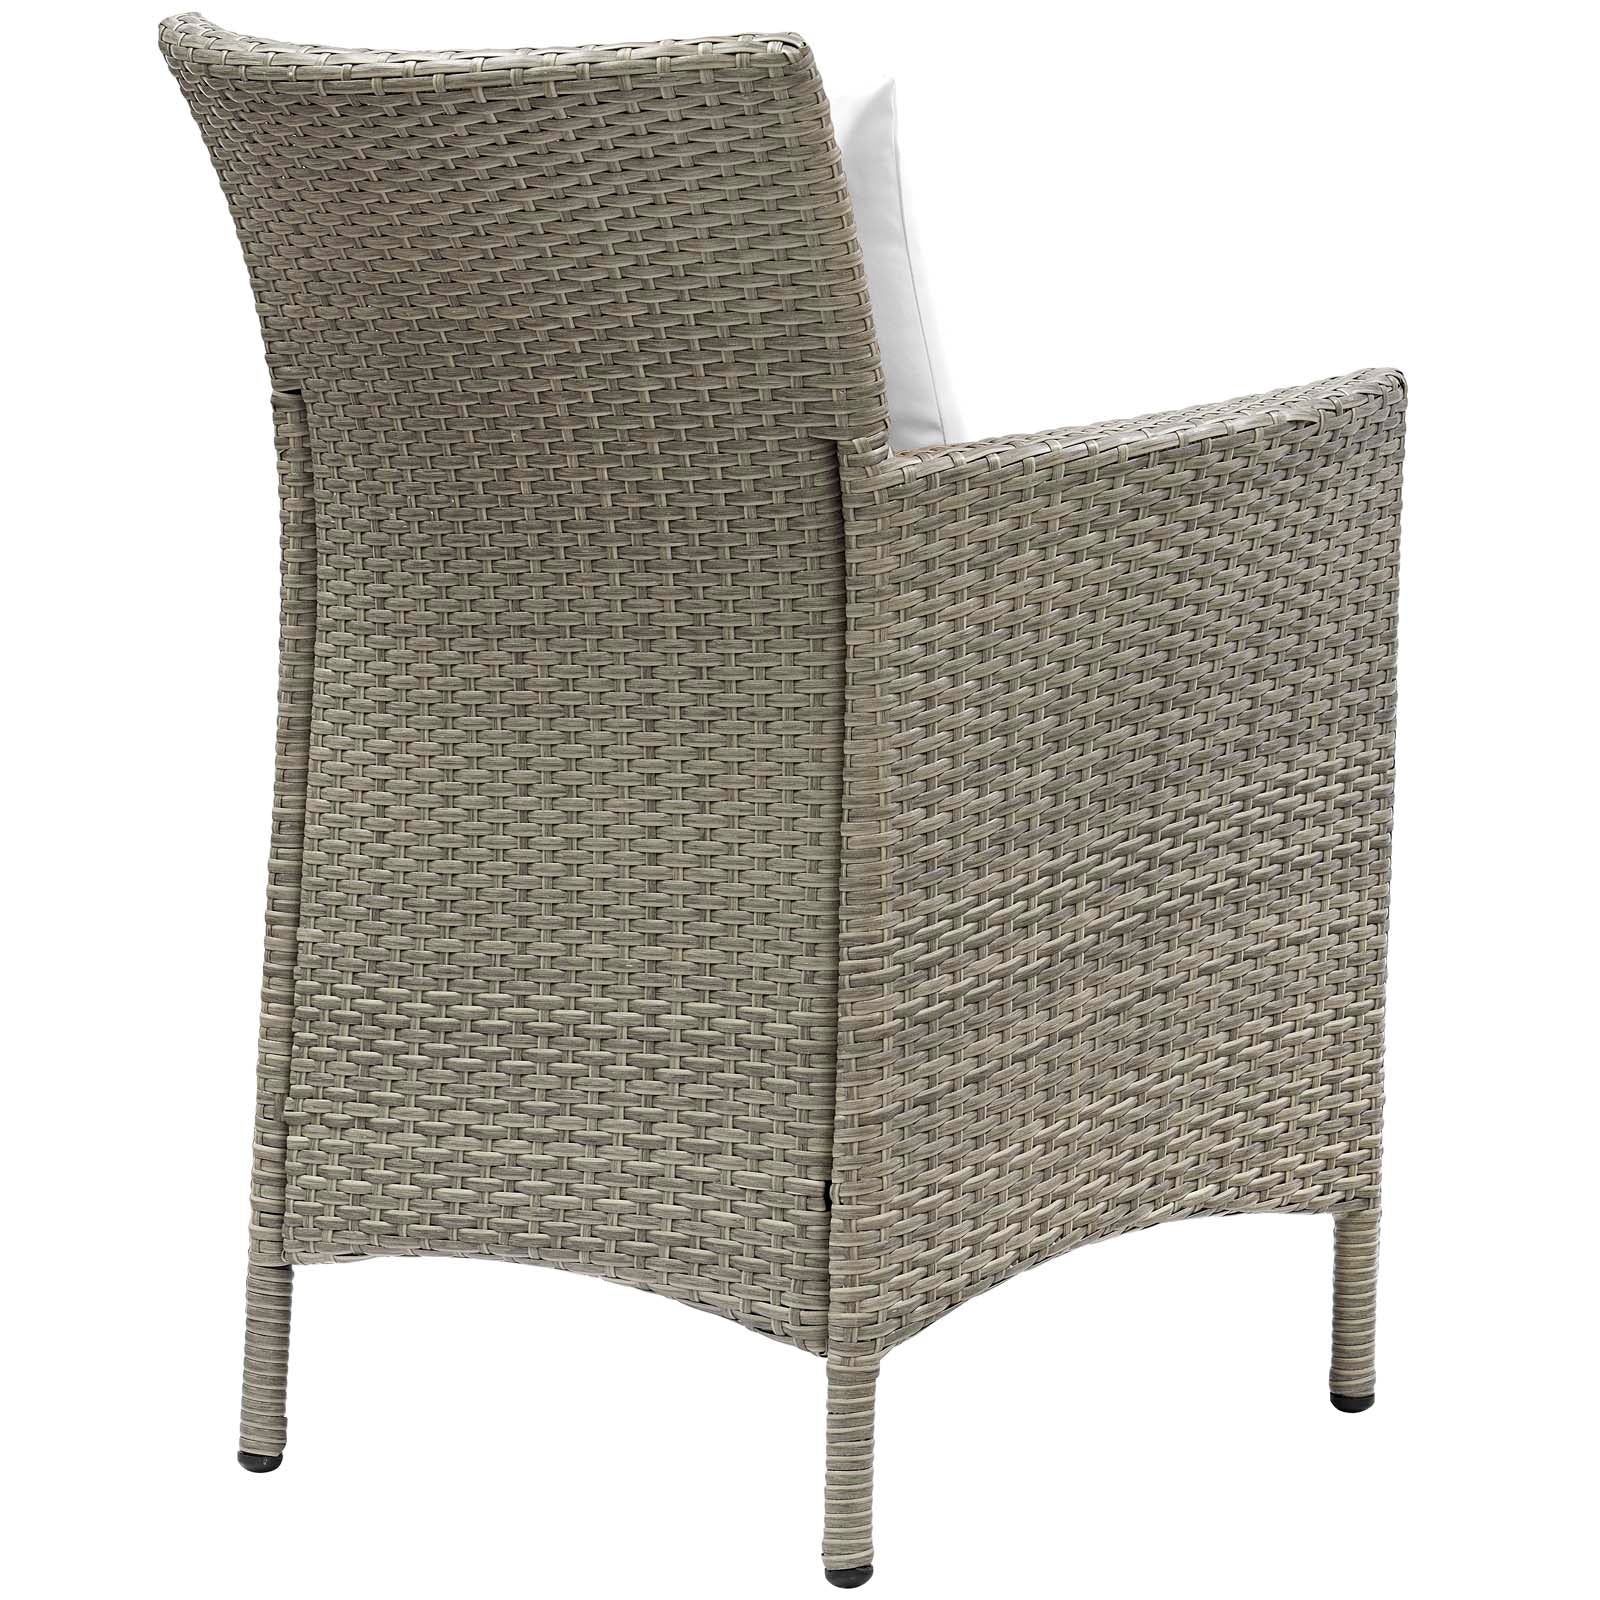 Modway Outdoor Dining Chairs - Conduit Outdoor Patio Wicker Rattan Dining Armchair Light Gray White